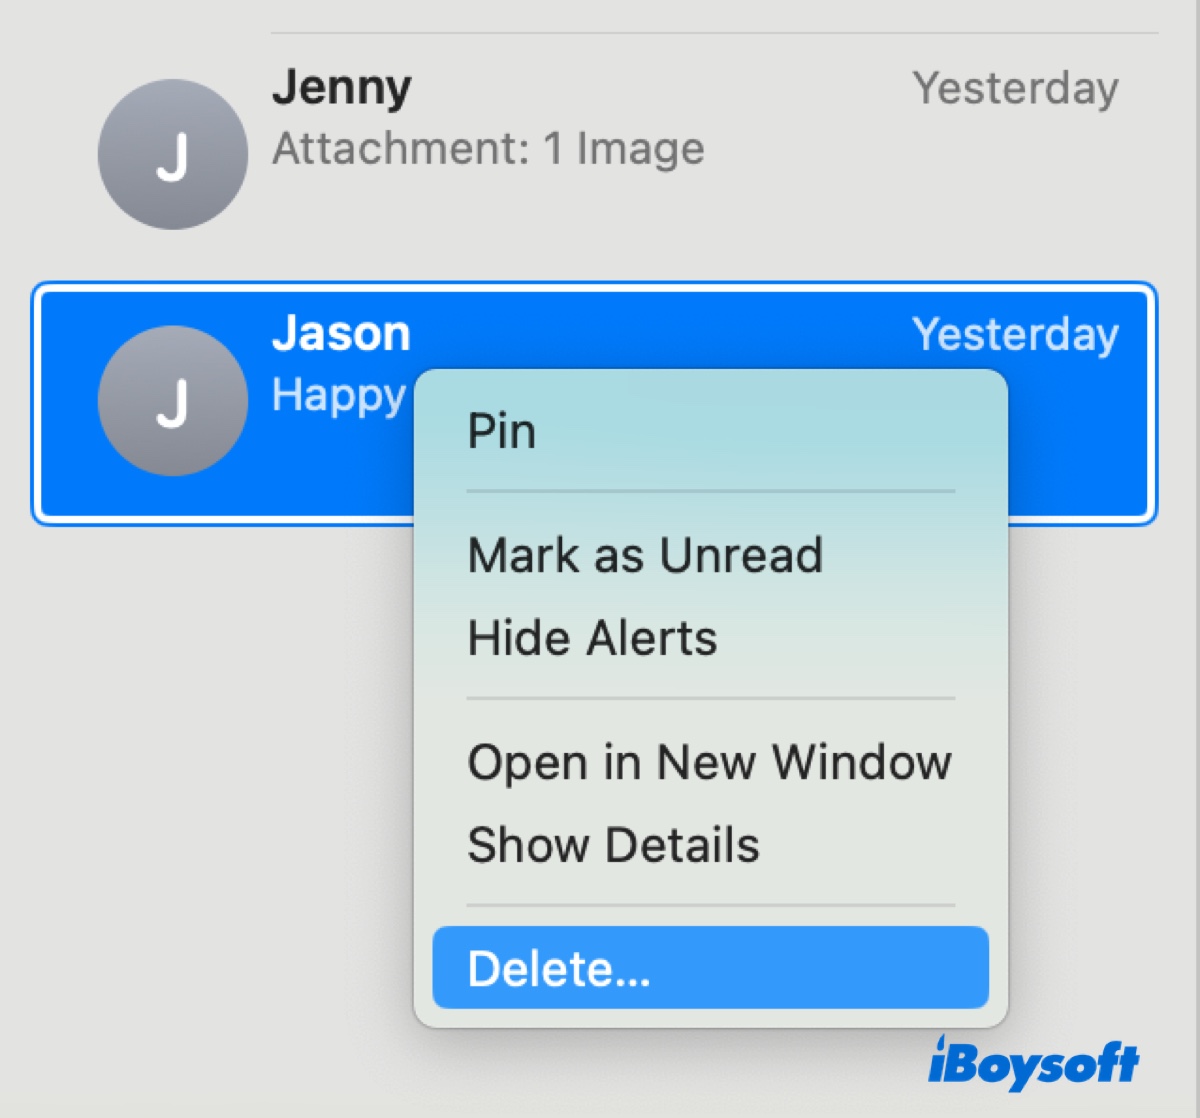 How to remove unwanted messages in the Messages app to clear space